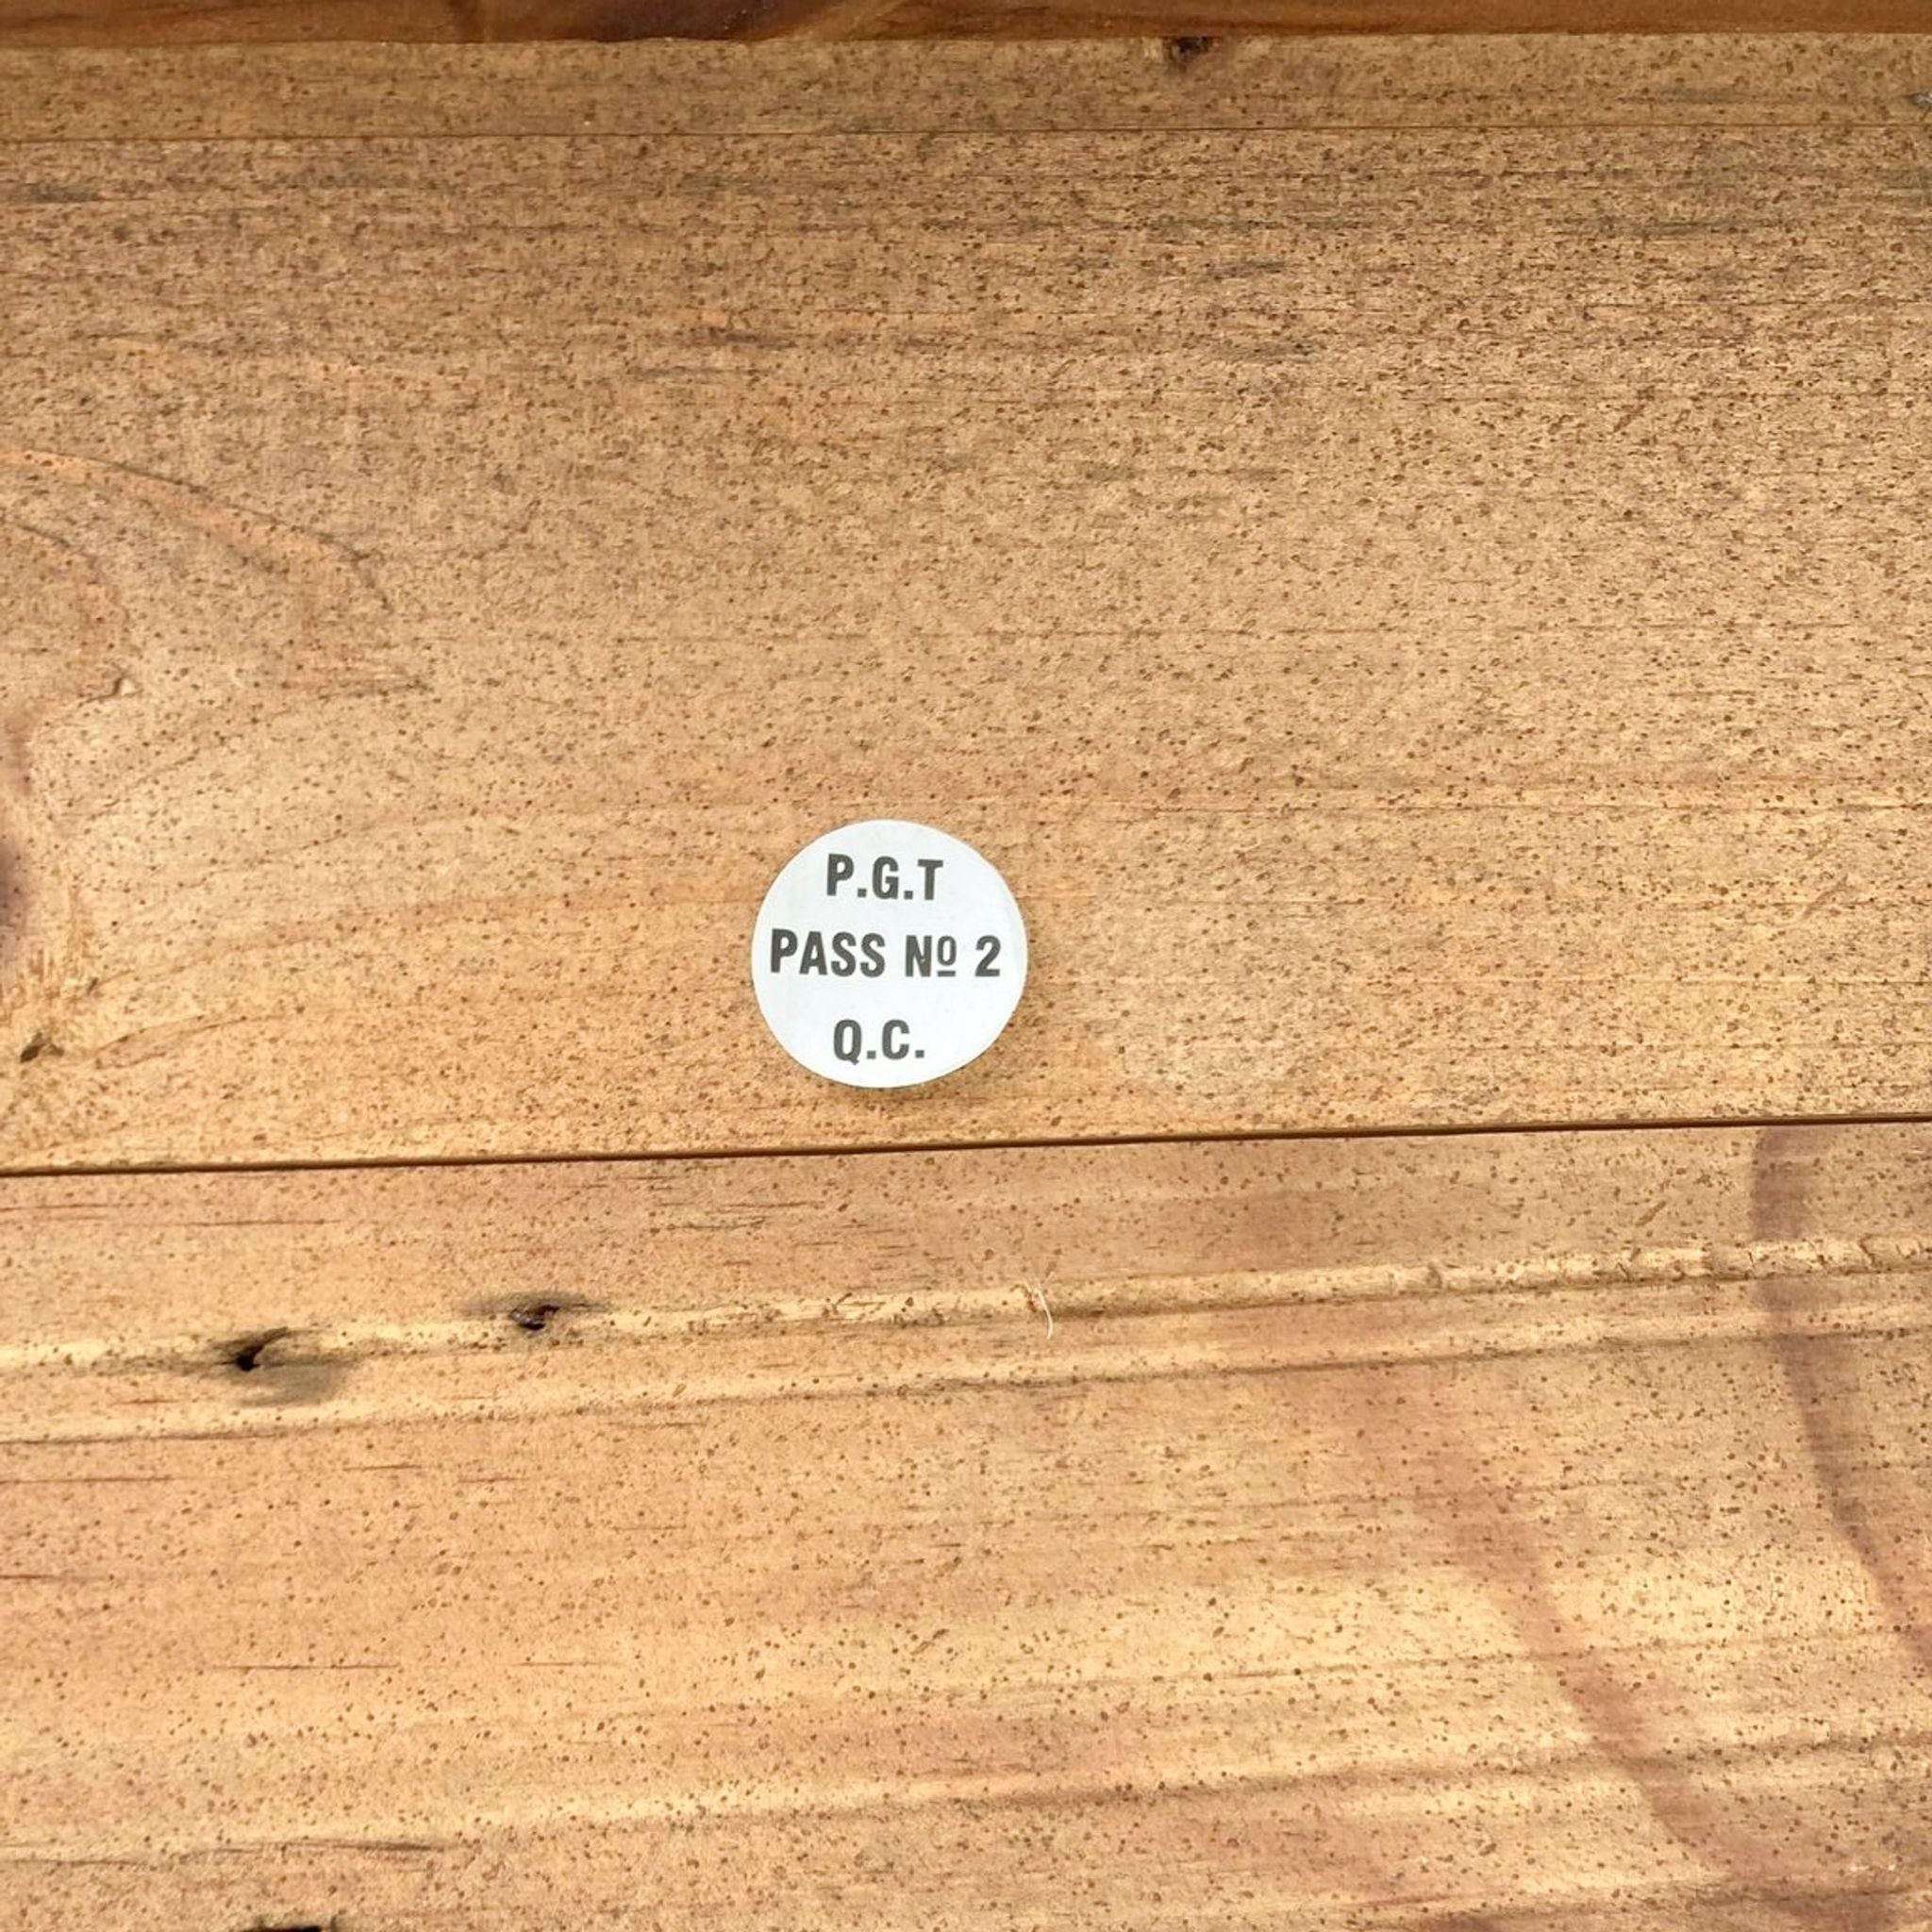 3. Quality control sticker on a rustic wooden bench indicating a passed inspection, with visible wood textures.